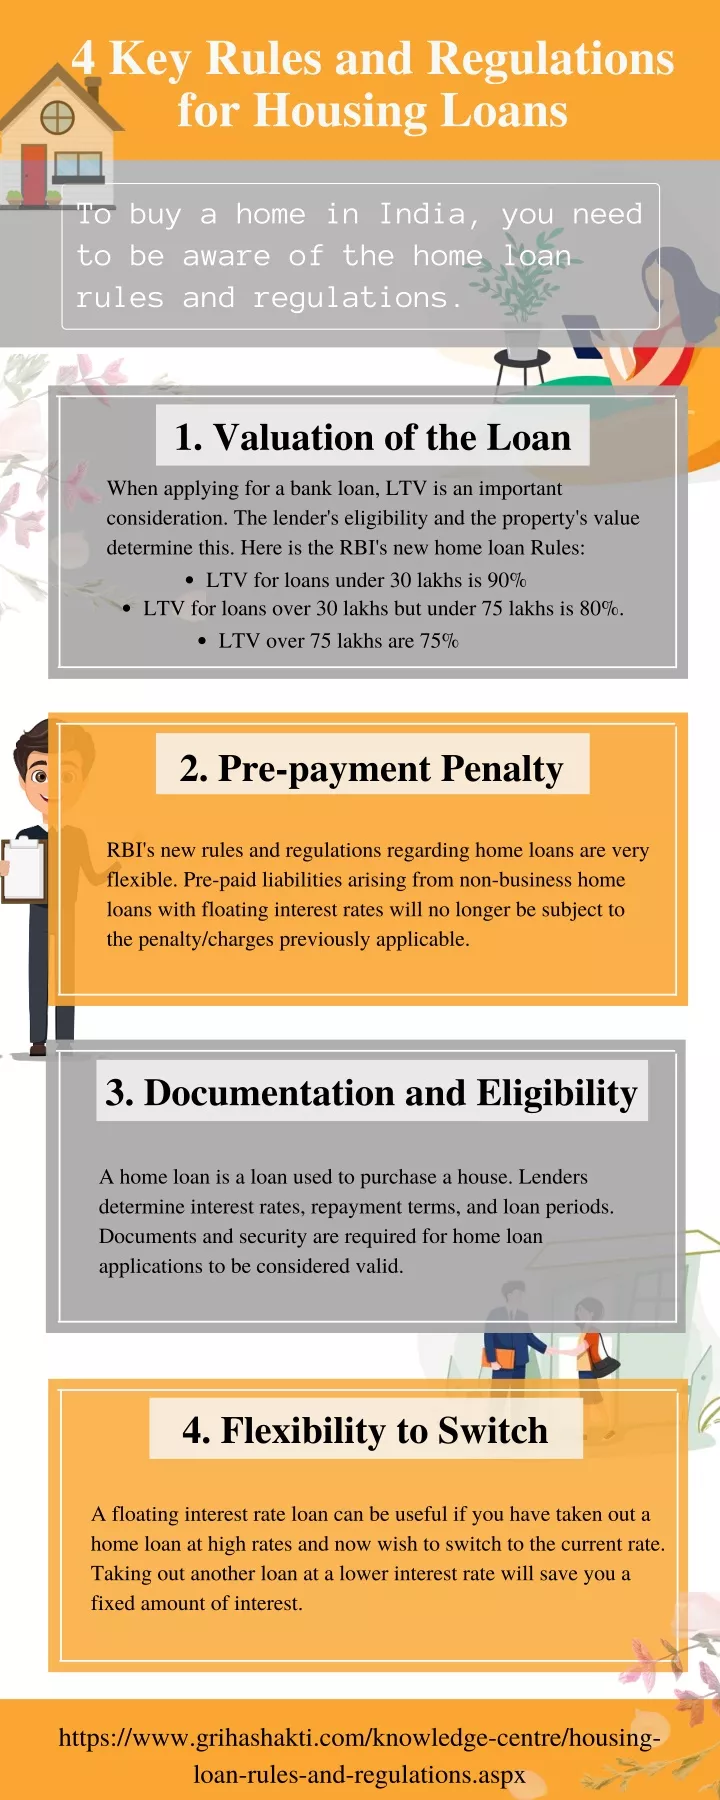 4 key rules and regulations for housing loans